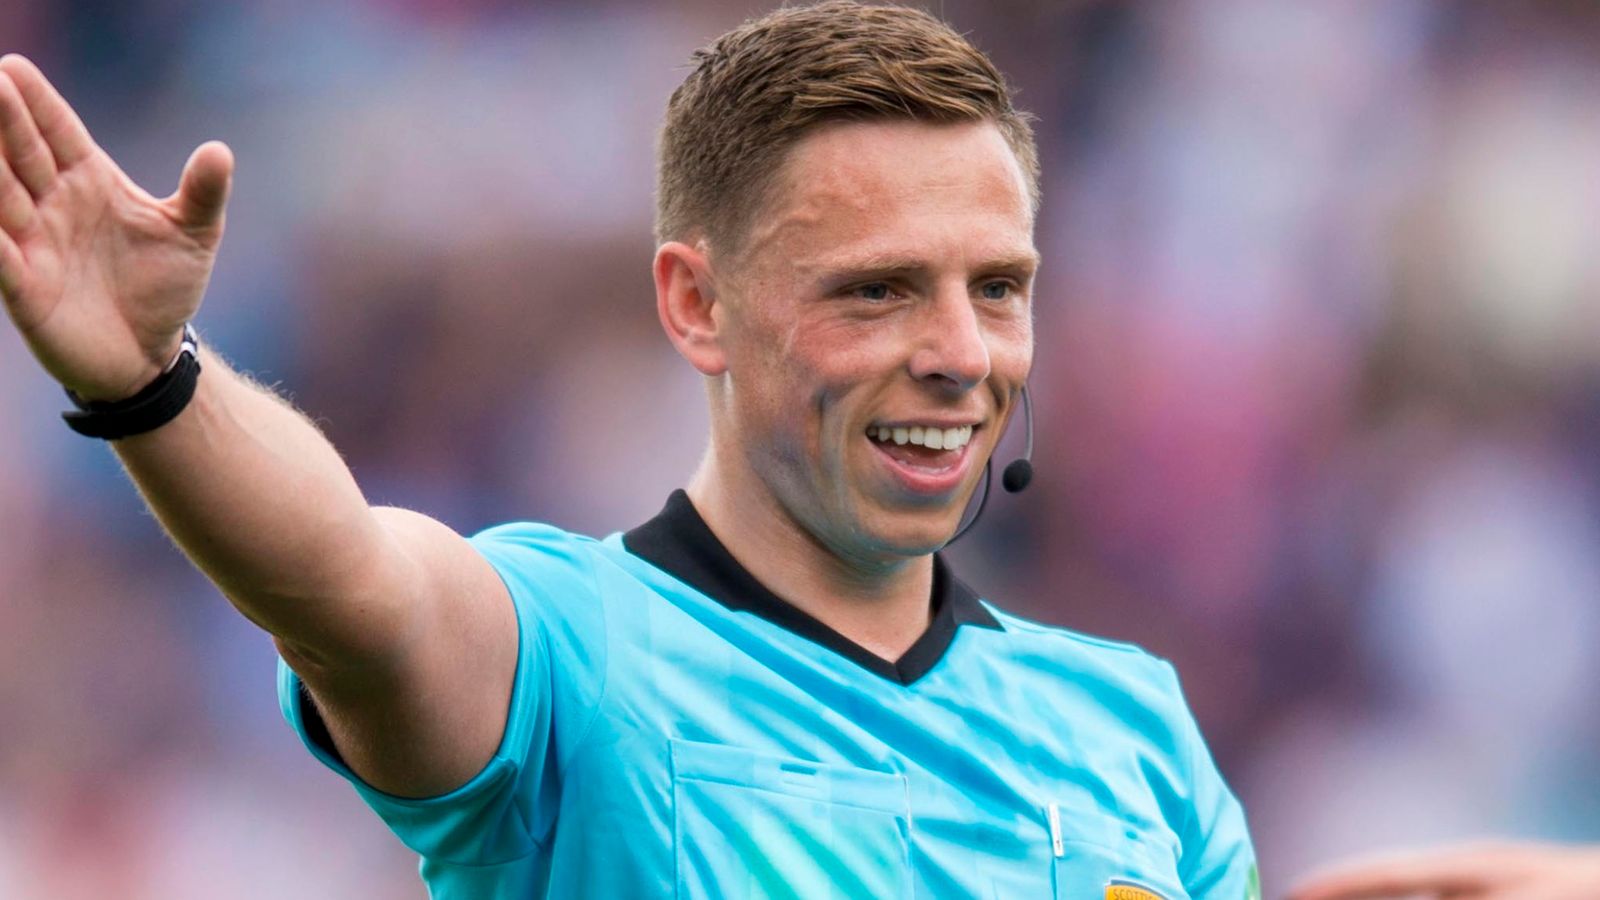 Lloyd Wilson: Scottish referee hopes decision to publicly come out as gay will inspire others